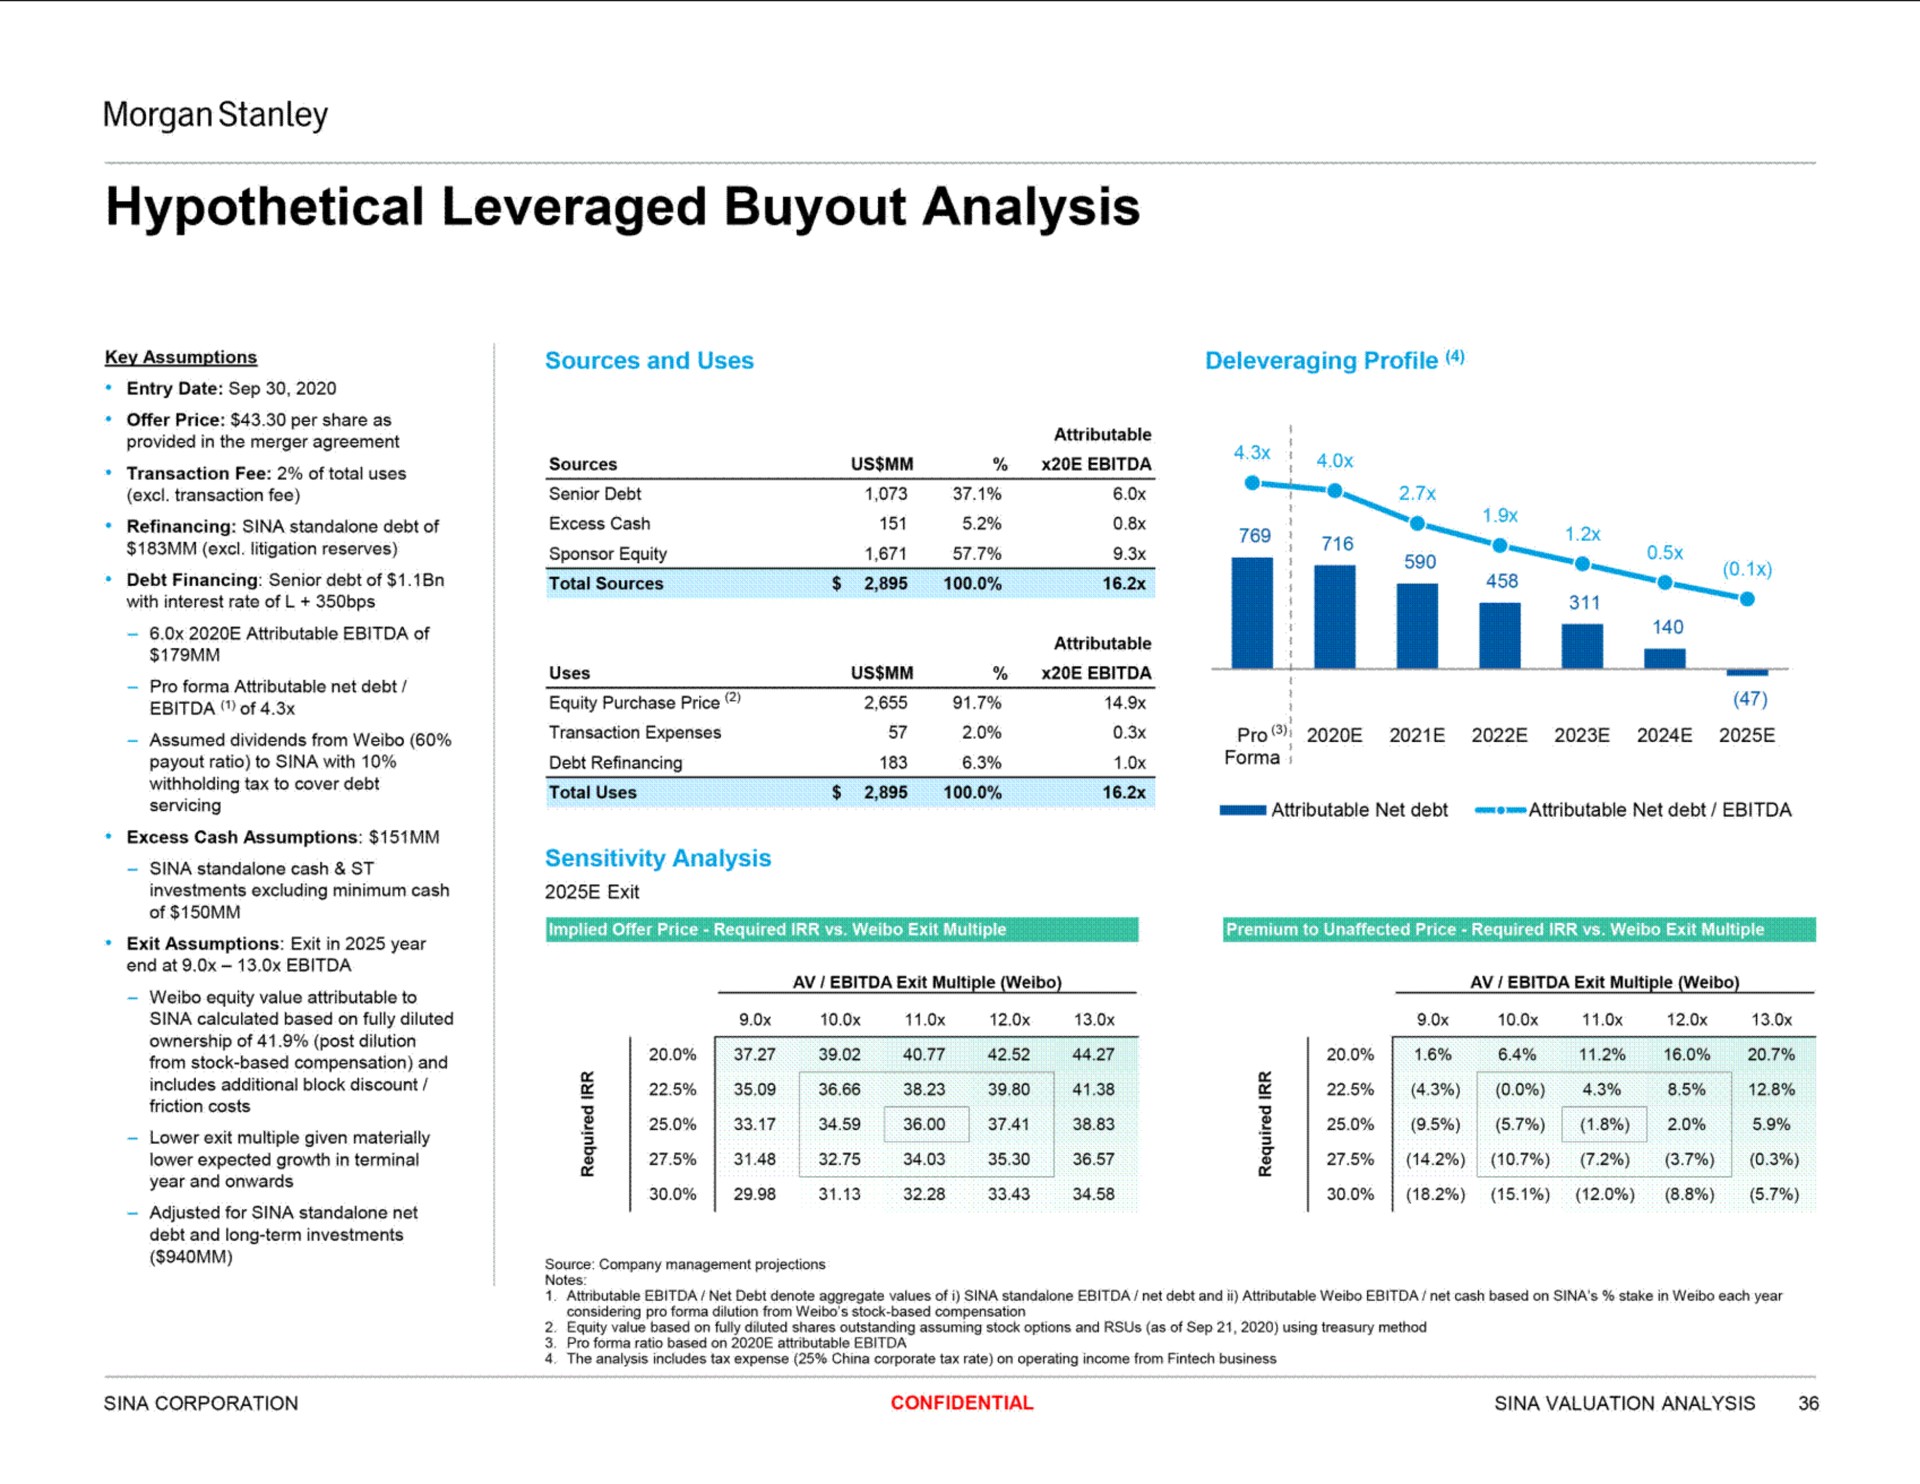 hypothetical leveraged analysis | Morgan Stanley